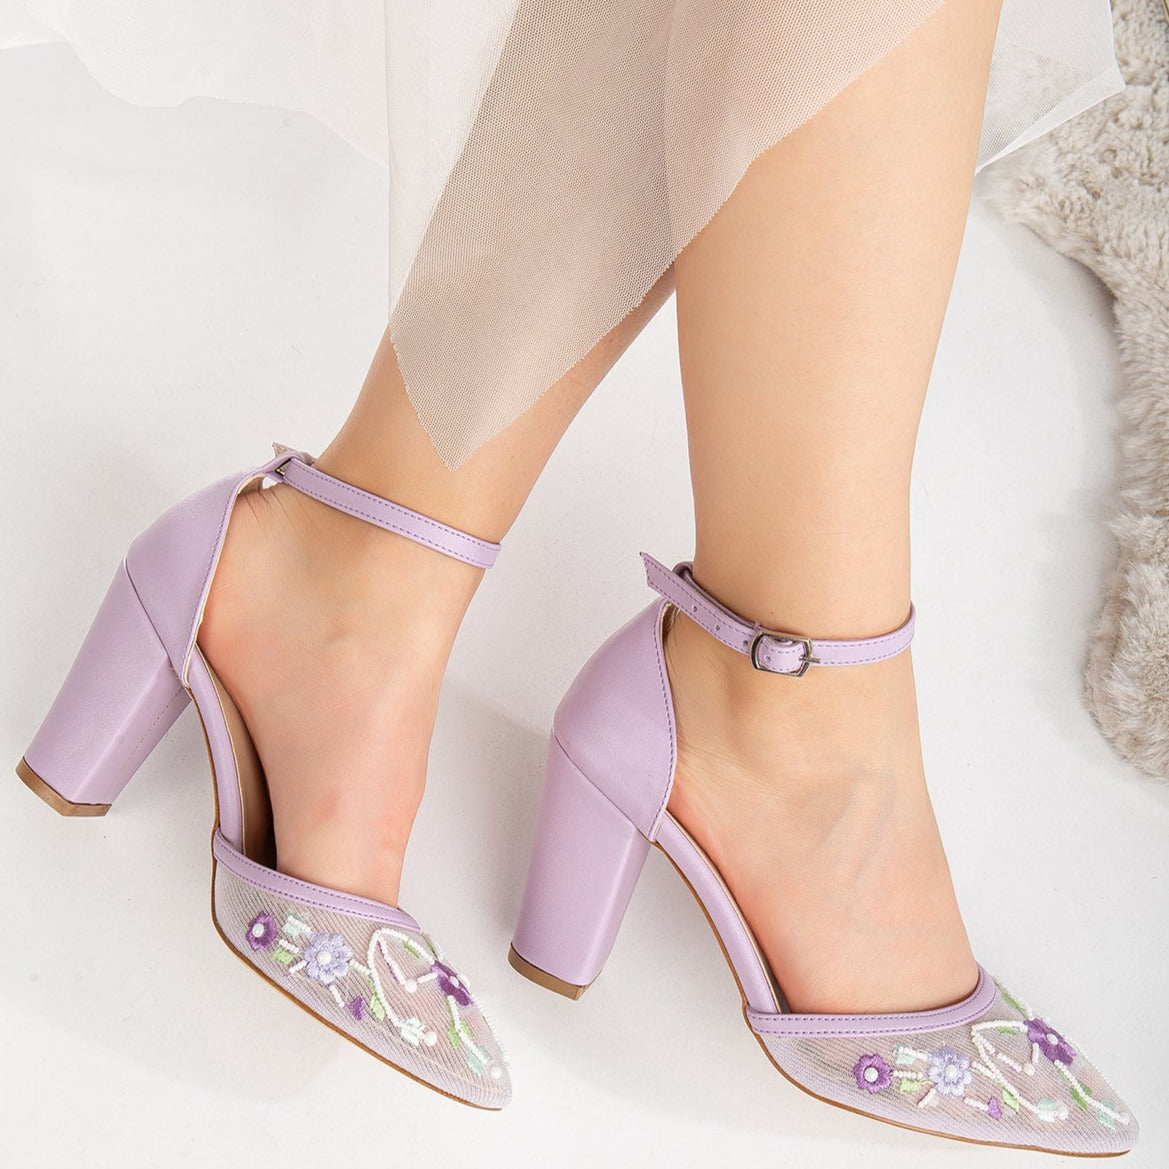 Lavender embroidered high heels, Embroidered lavender heels, Lavender floral embroidered heels, Lavender embellished high heels, Lavender heels with intricate embroidery, Lavender embroidered stilettos, Lavender embroidered pumps, Lavender high heels with delicate embroidery, Lavender embroidered wedding heels, Lavender embroidered bridal shoes.